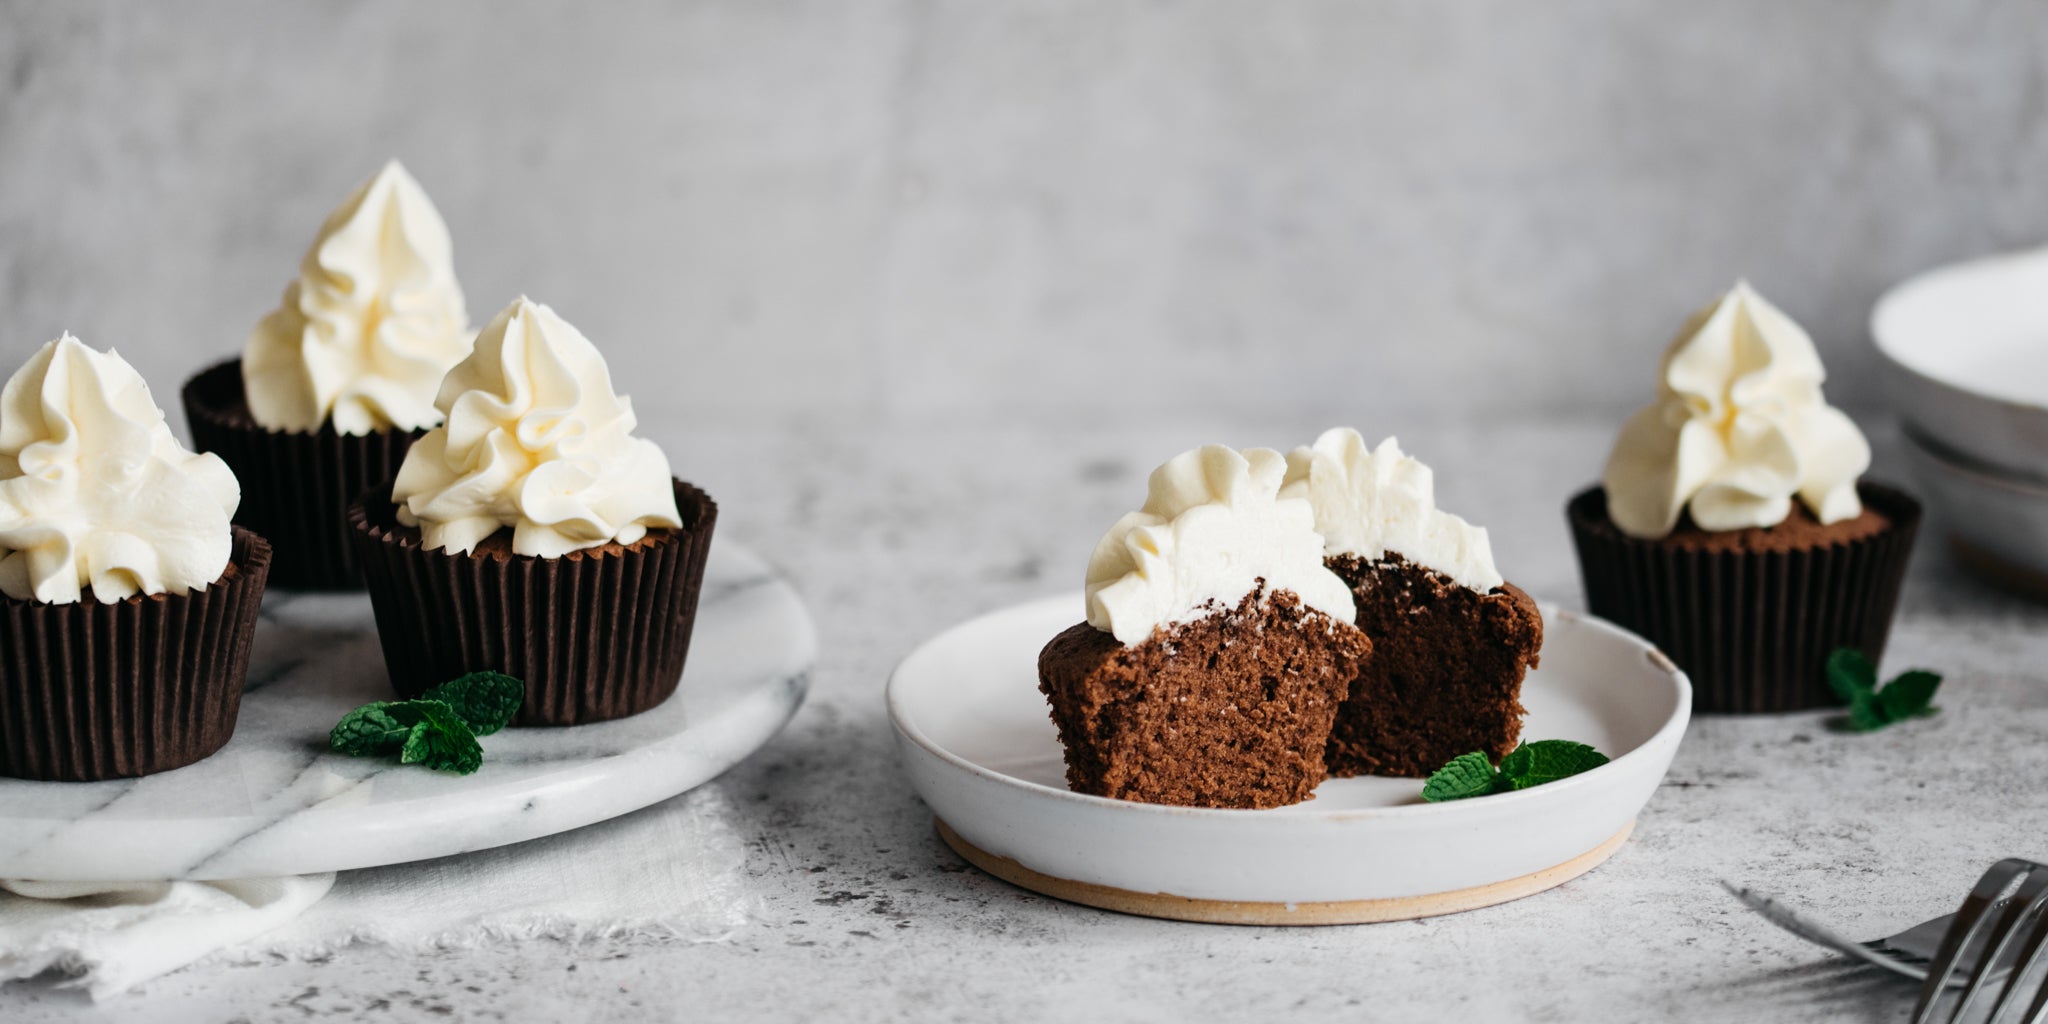 Chocolate & Peppermint Cupcakes served on a marble cake stand, with a cupcake sliced in half showing the fluffy insides